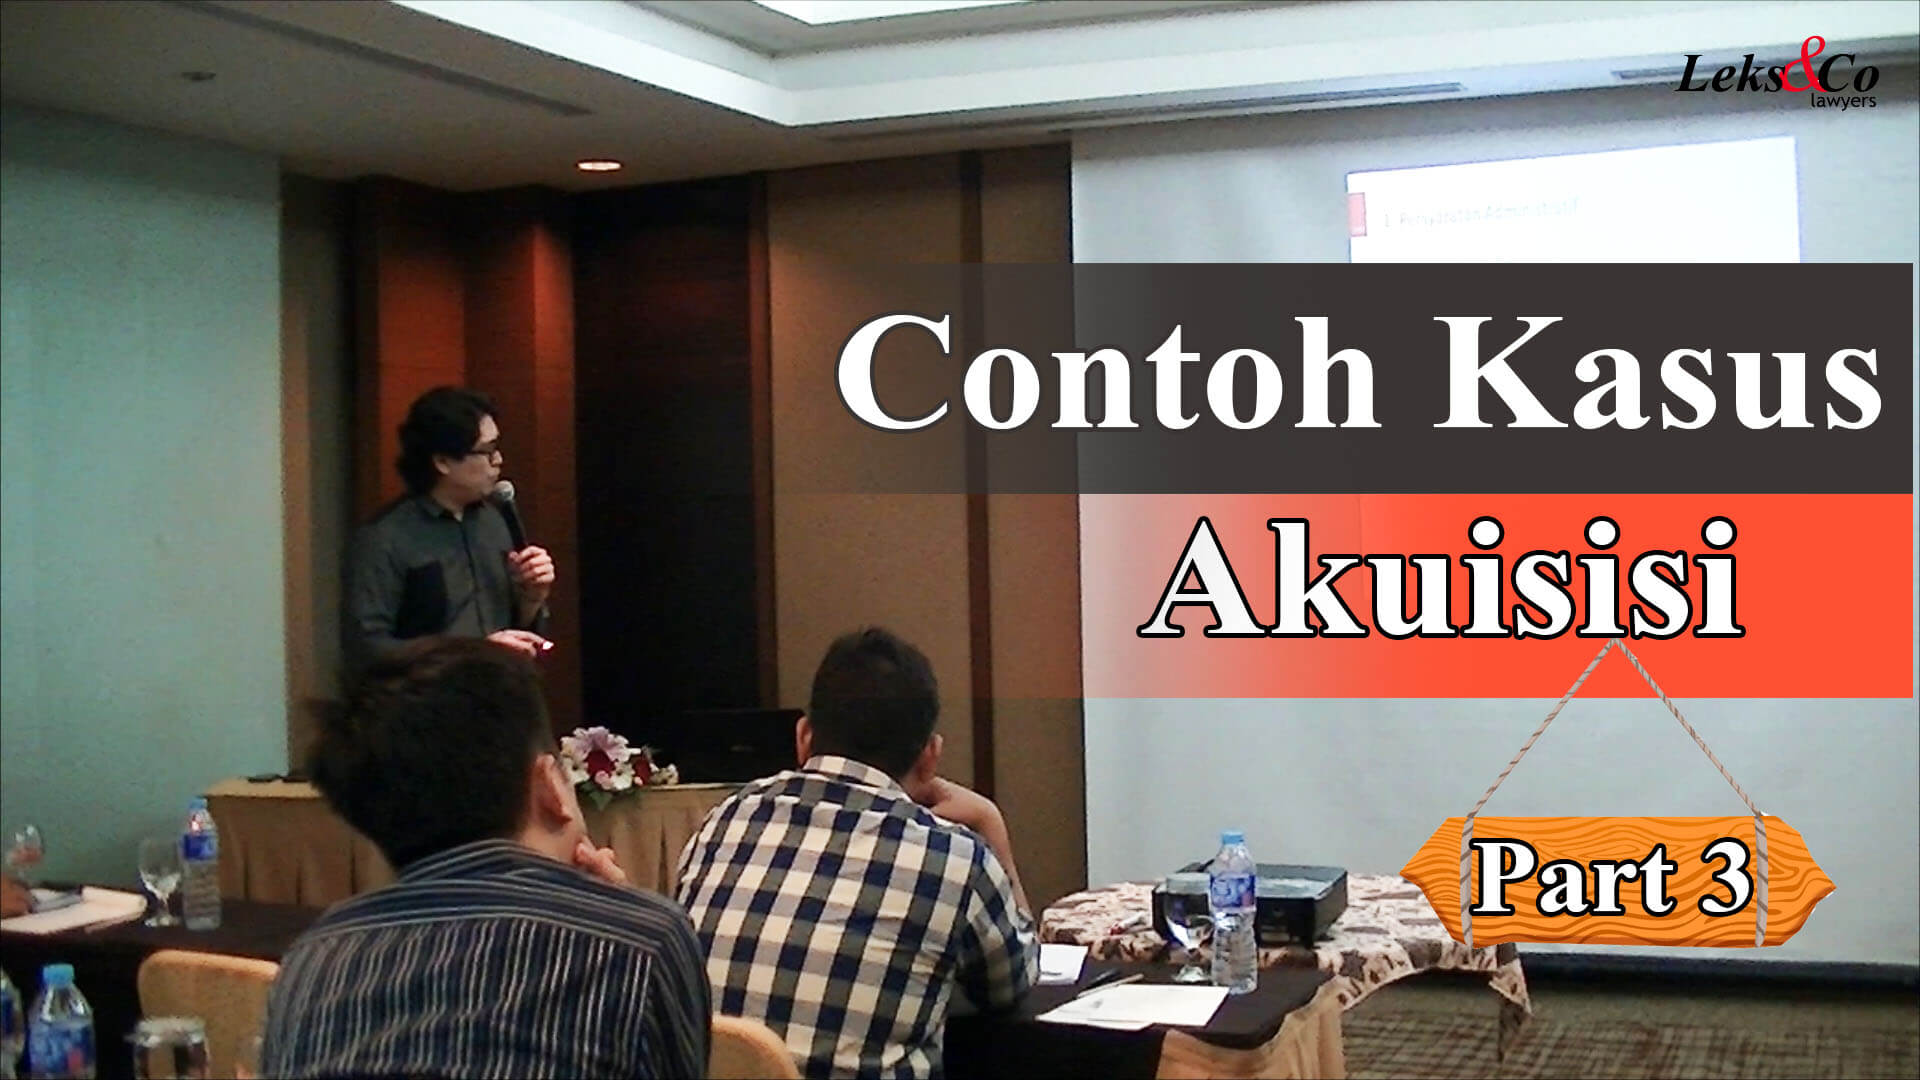 Indonesia Law Firm – Contoh Kasus Akuisisi Part 3